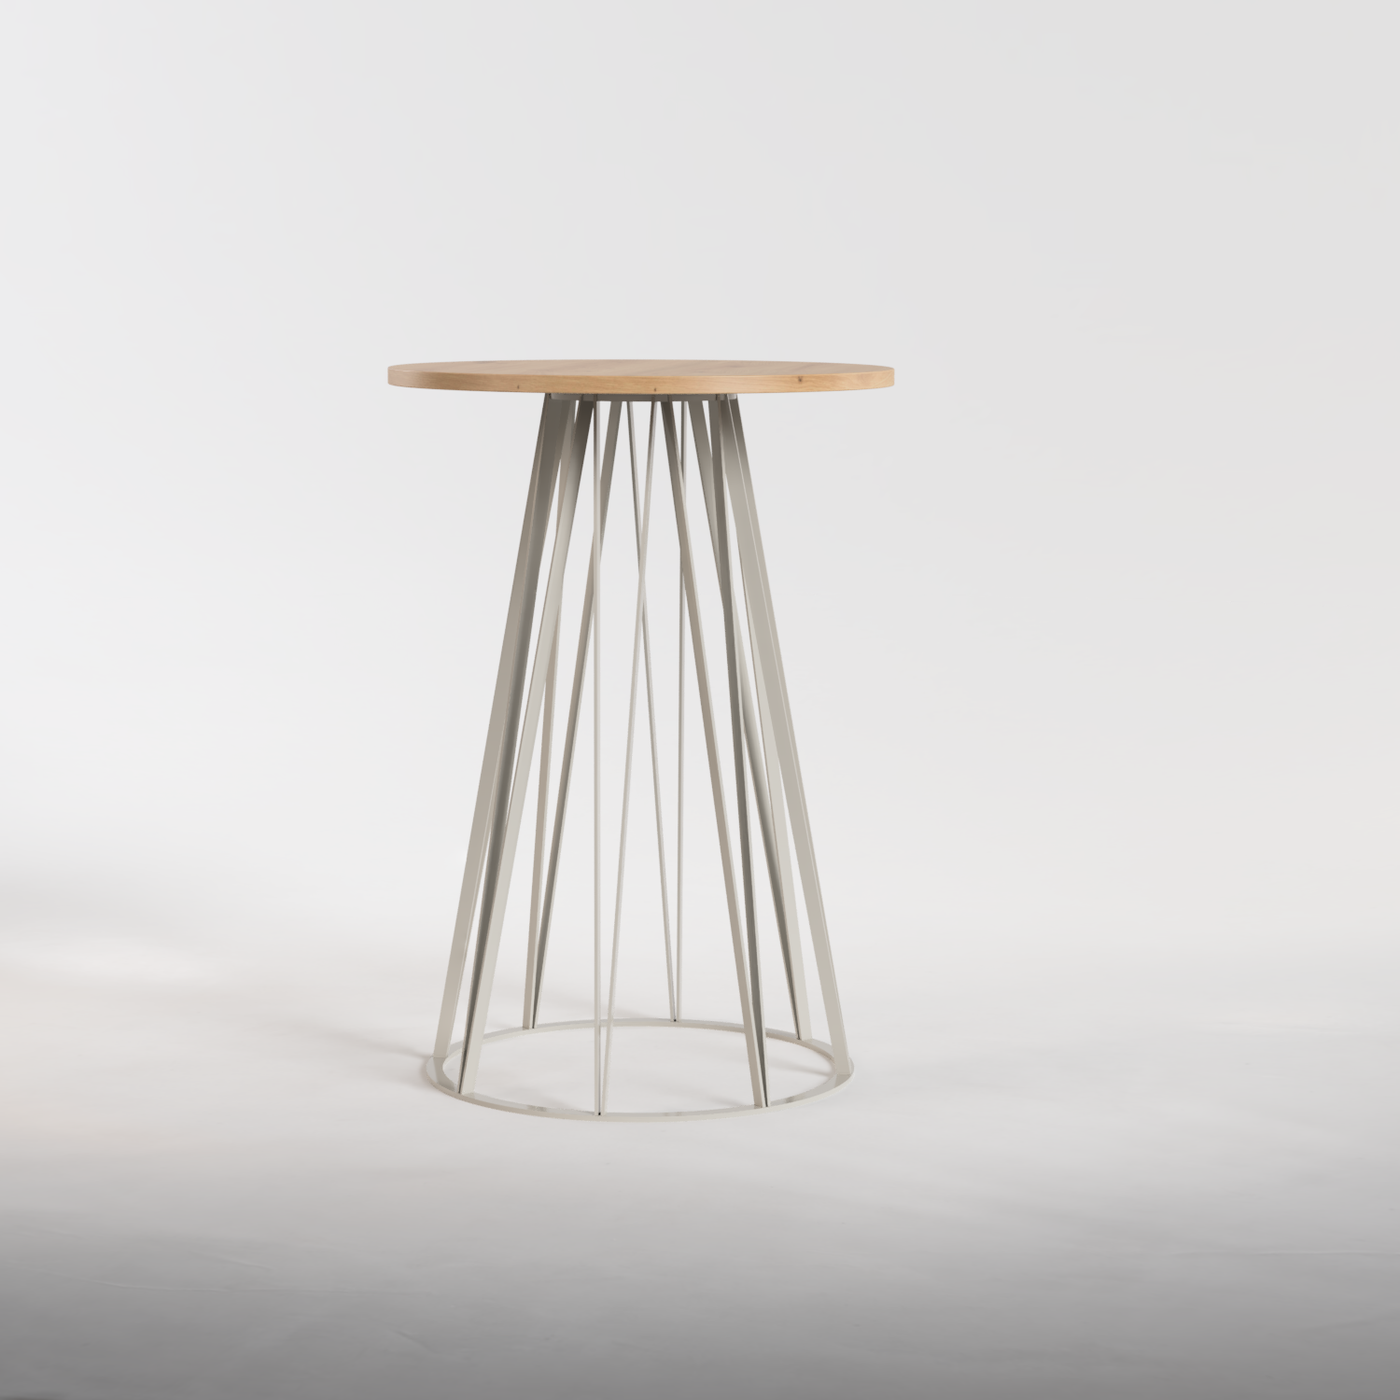 Round Table Nº 2 - Poseur Table - Silk Grey / Solid Oak